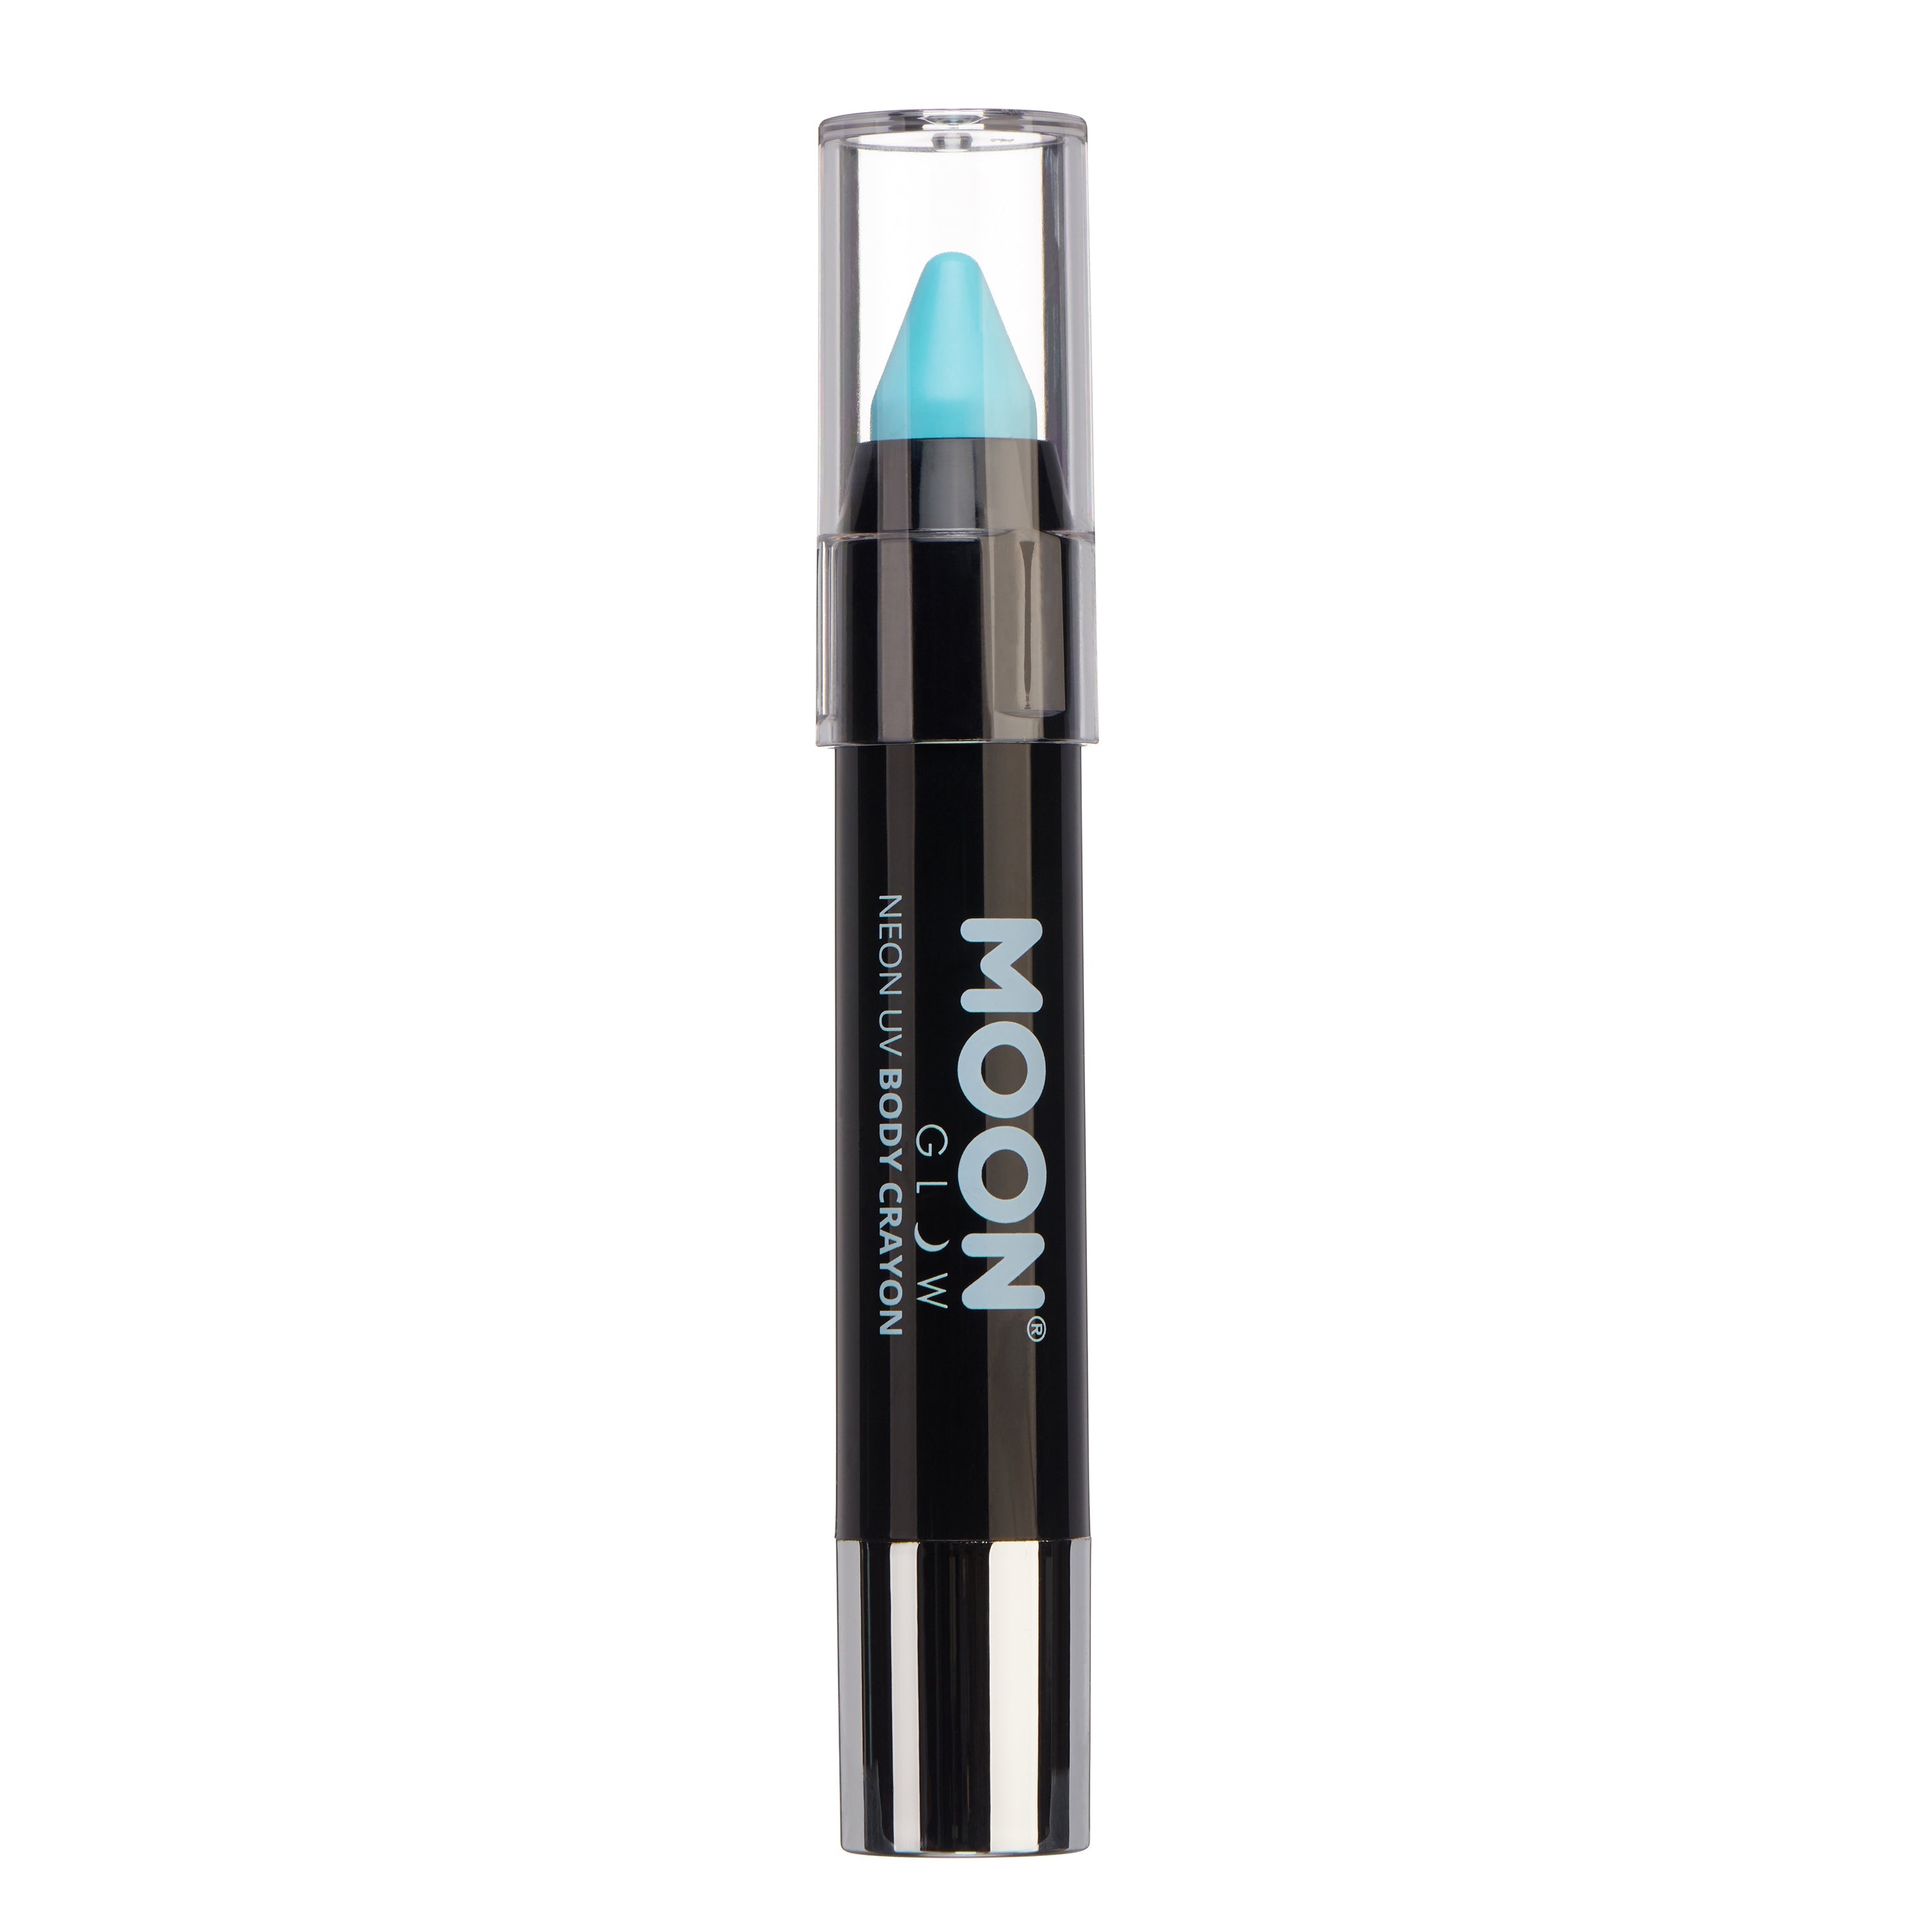 Pastel Blue - Neon UV Glow Blacklight Face & Body Crayon, 3.5g. Cosmetically certified, FDA & Health Canada compliant and cruelty free.